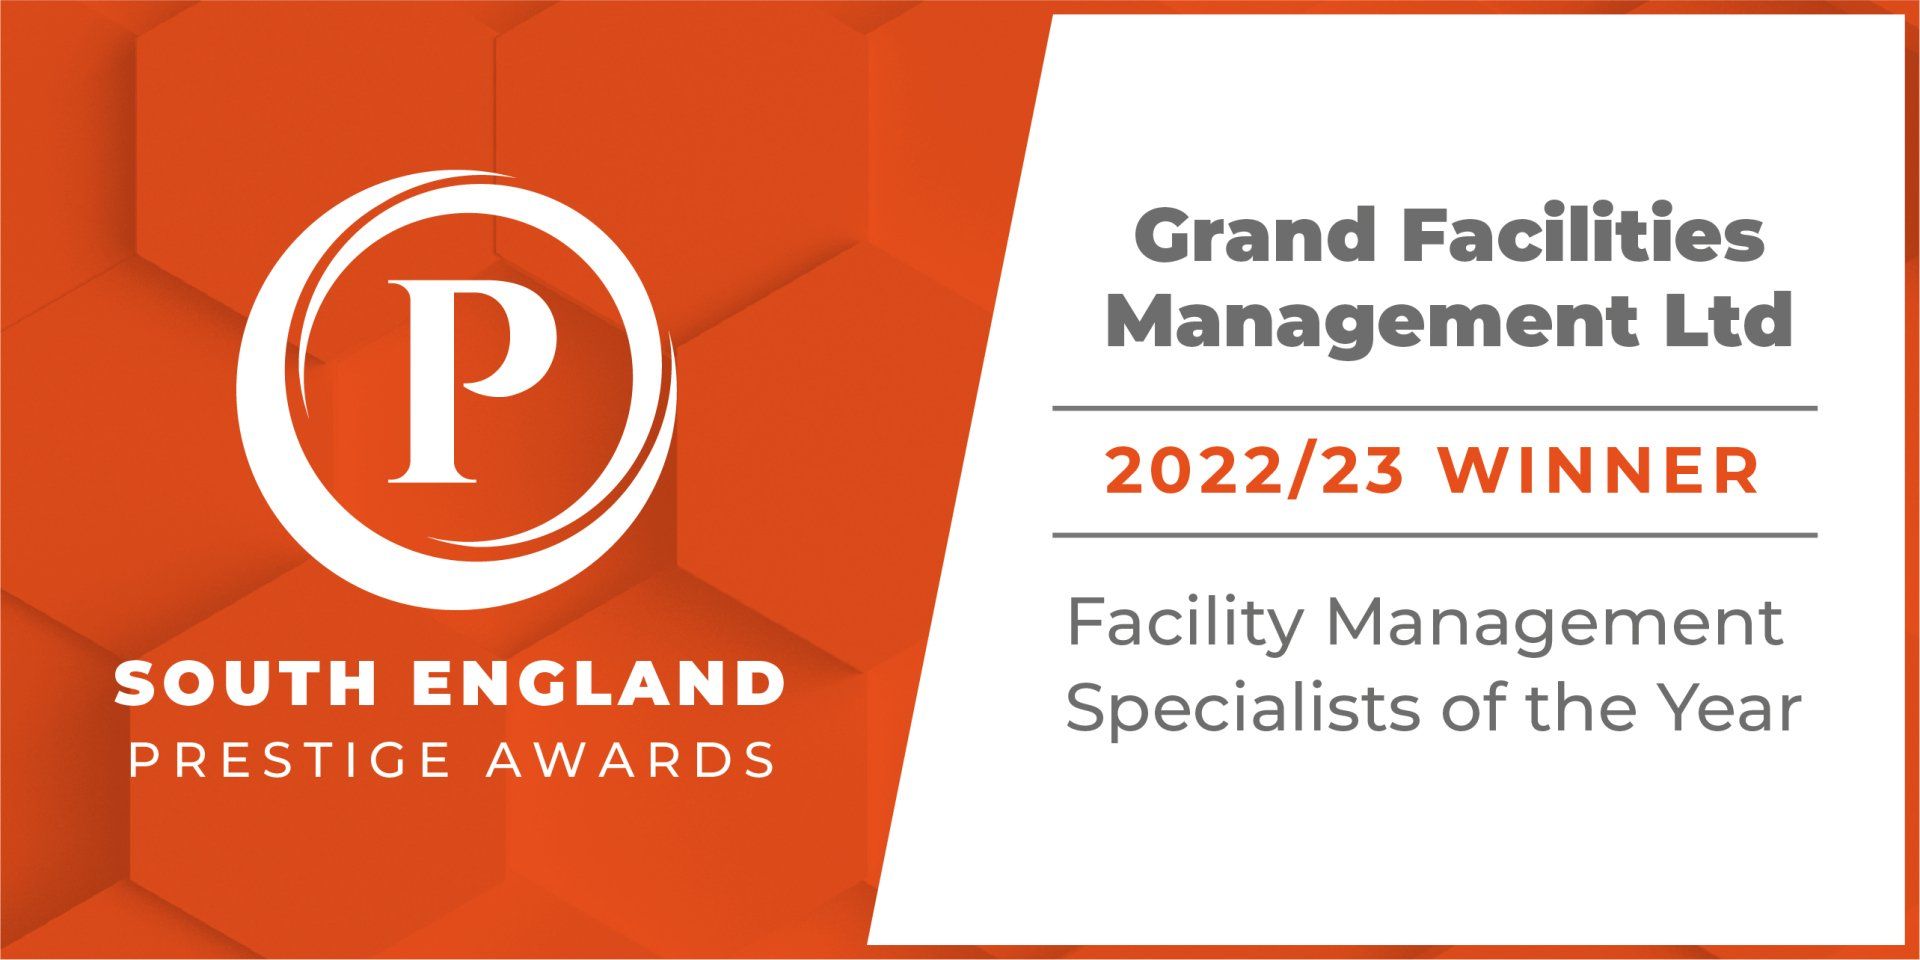 Grand Facilities Management Ltd Prestige Awards 2022/23 Facility management specialists of the Year